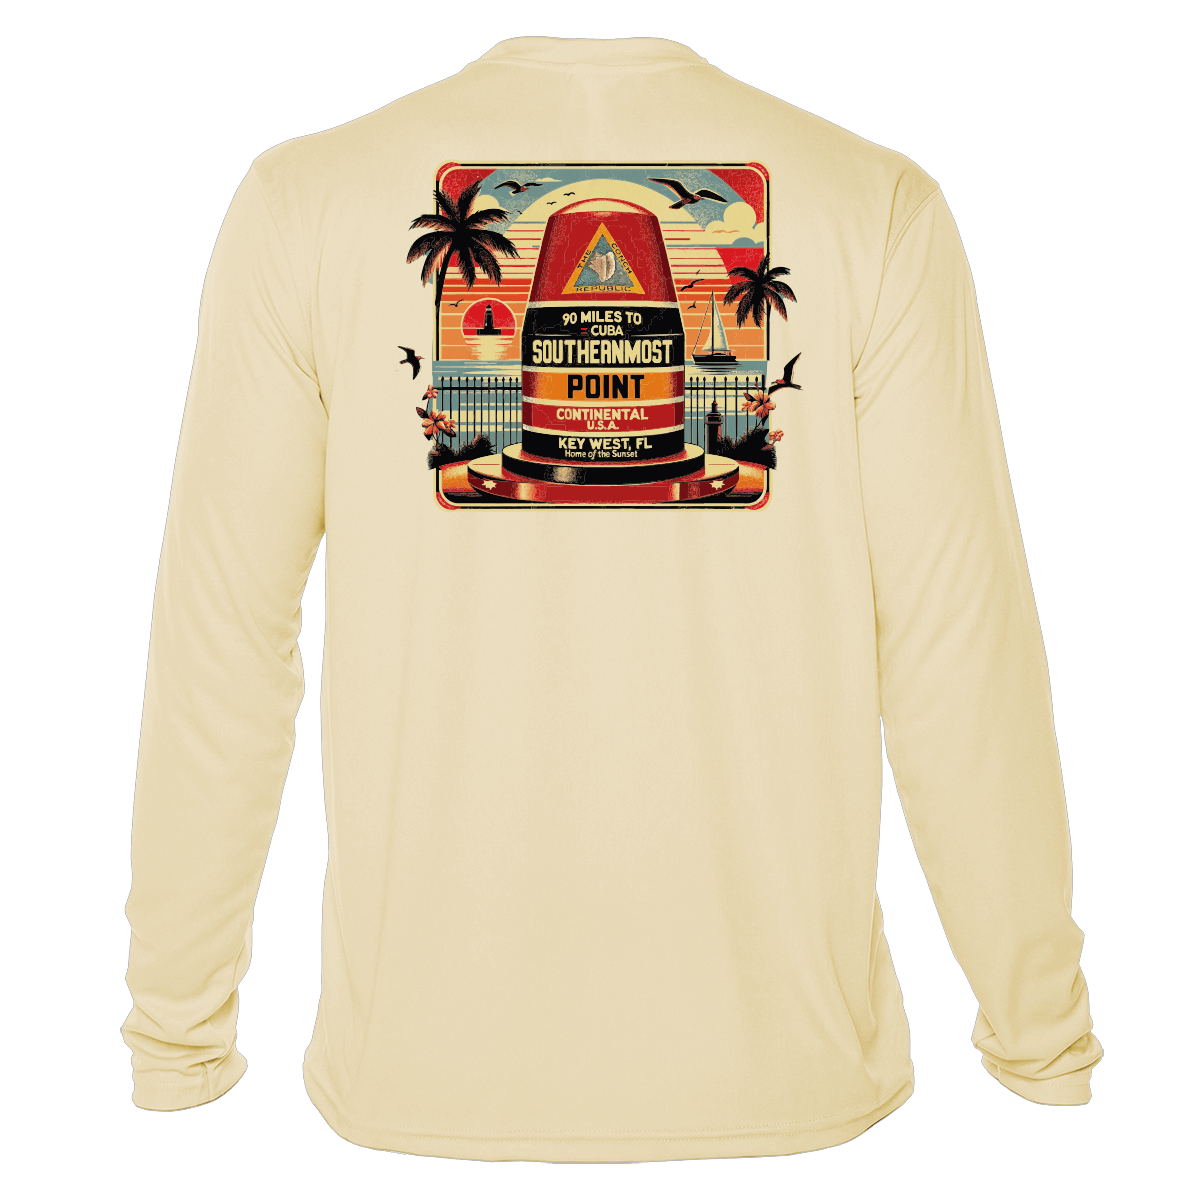 Key West Sun Shirts - Southernmost Point Bouy - UPF 50+ Long Sleeve - Pale Yellow,MED